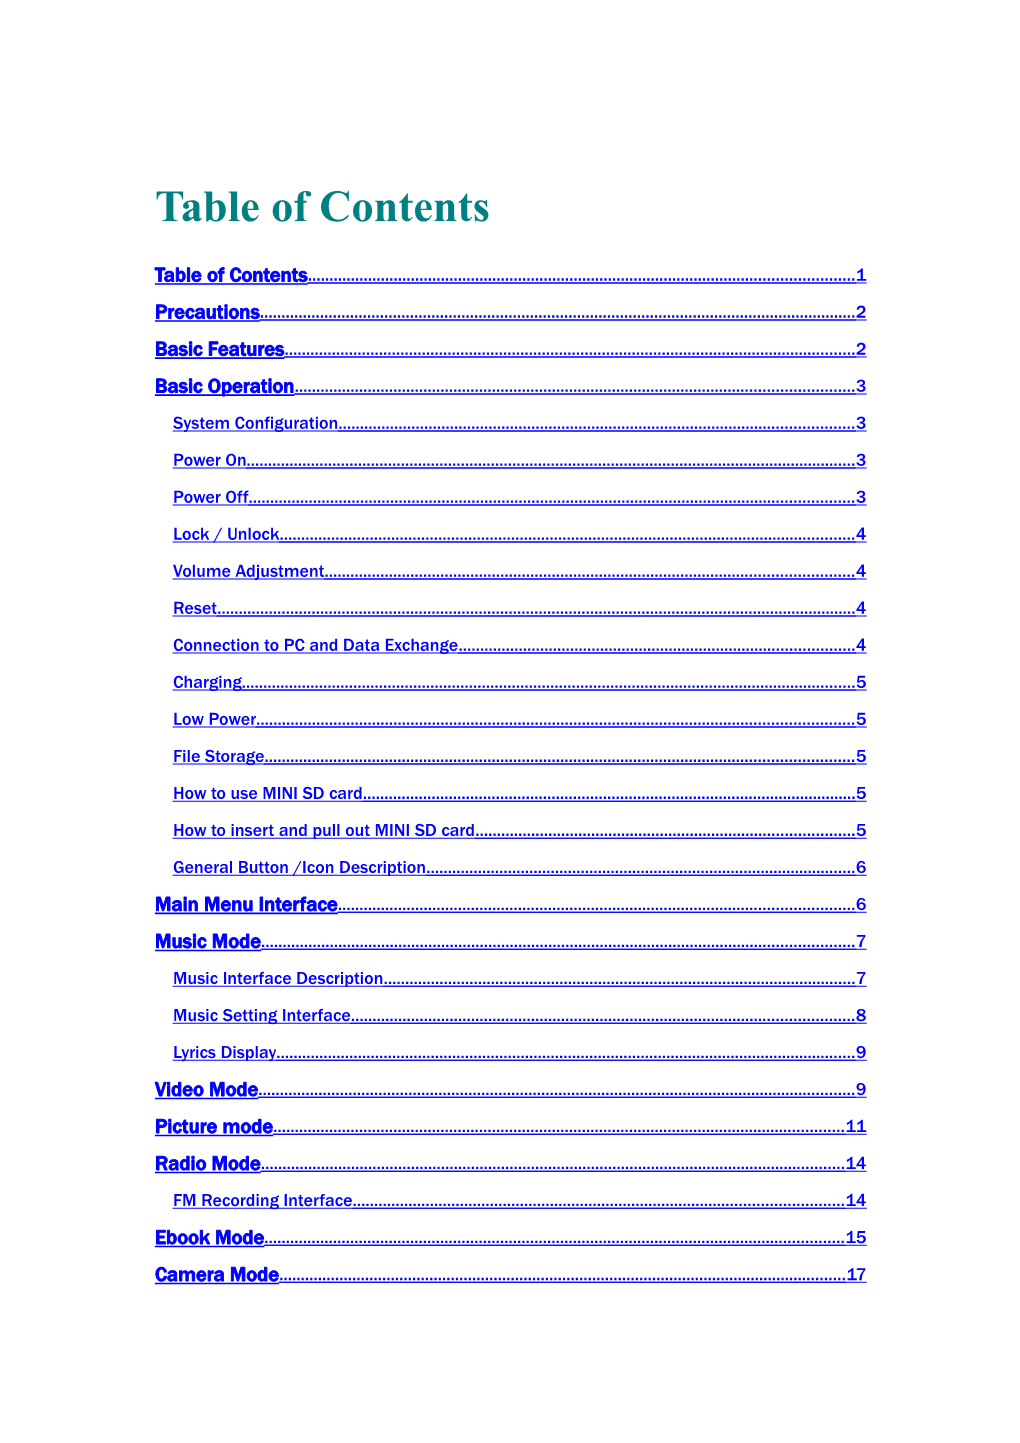 Table of Contents s155